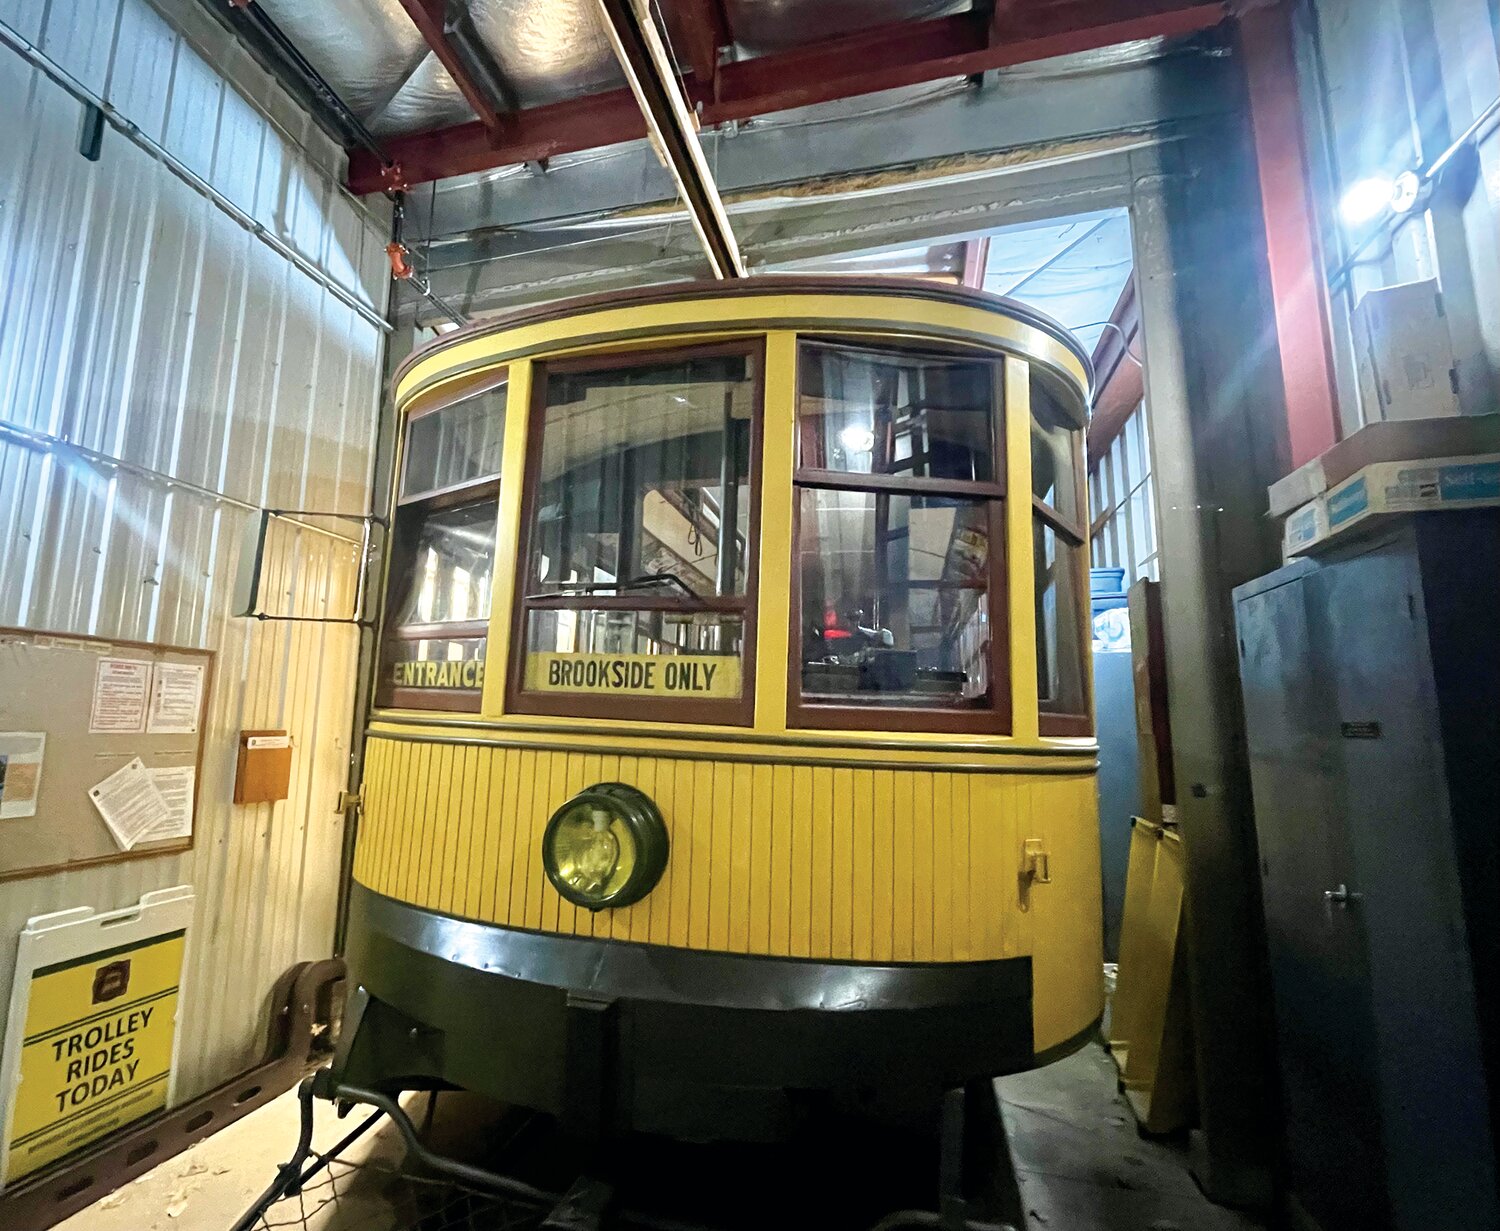 Interior and exterior of car No. 1300. Built in 1908, it is the oldest of the pair of street cars traveling the Bde Maka Ska to Lake Harriet route in the summer months.